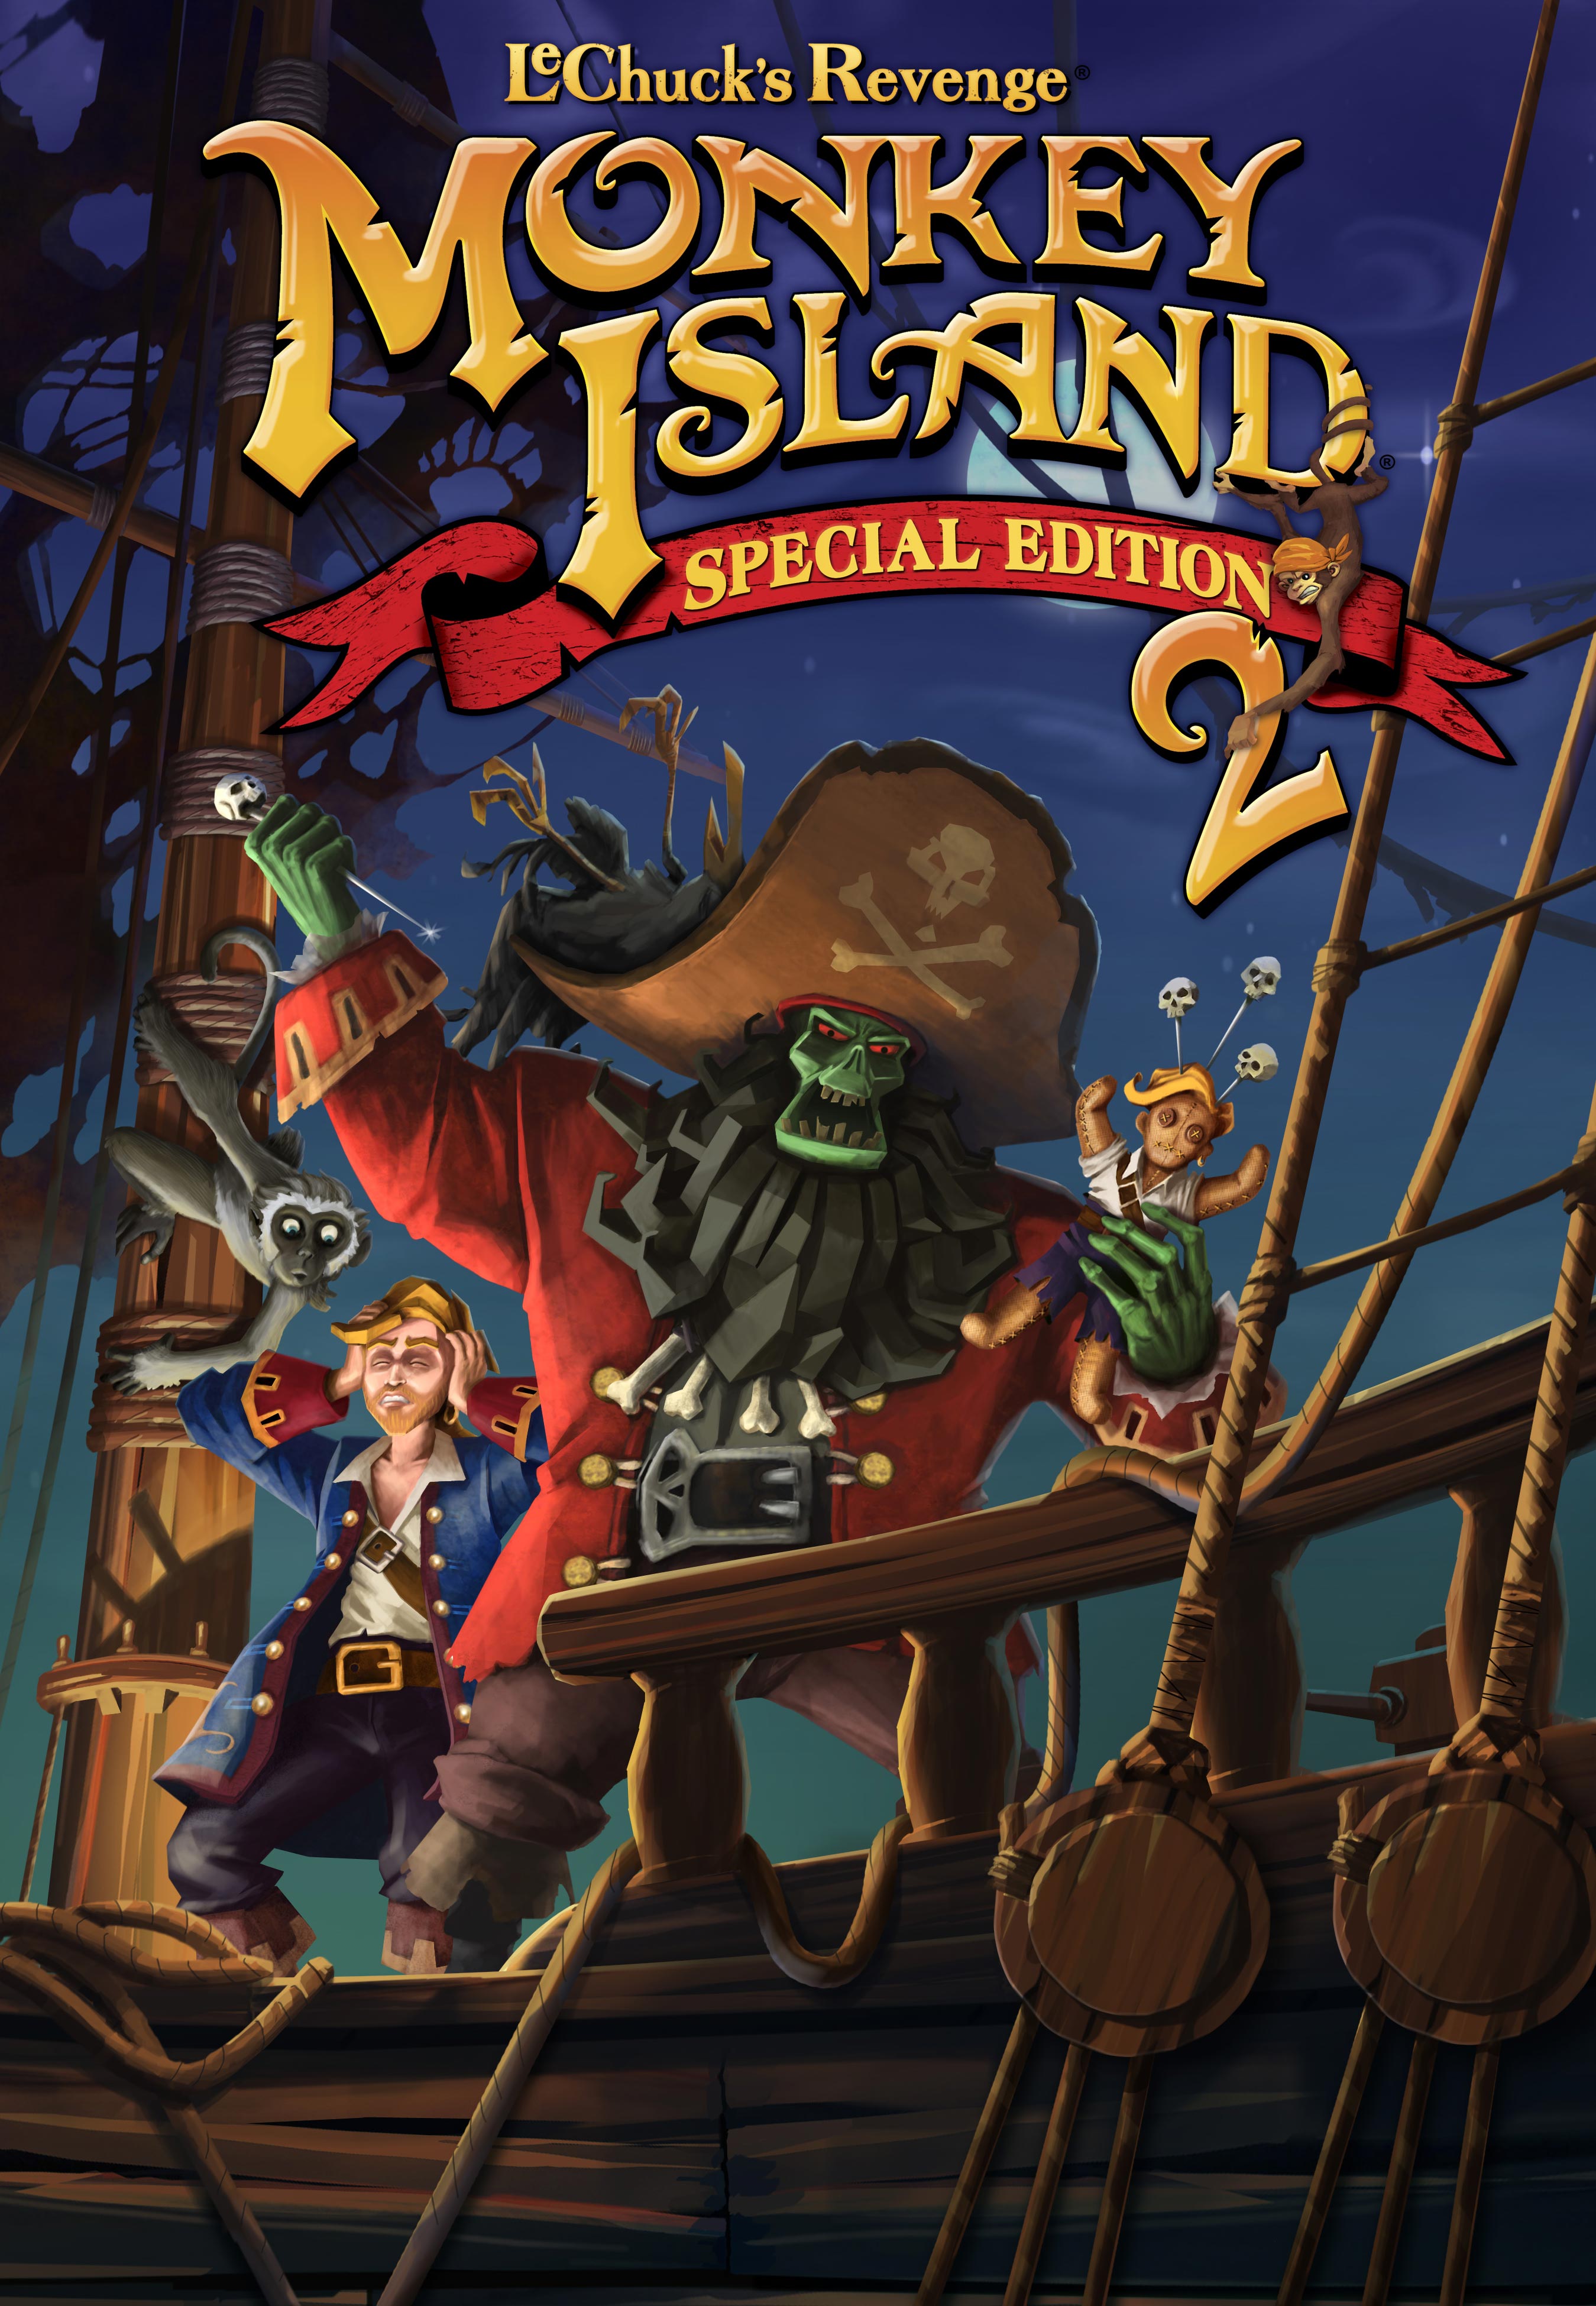 monkey-island-2-special-edition-lechuck-s-revenge-strategywiki-the-video-game-walkthrough